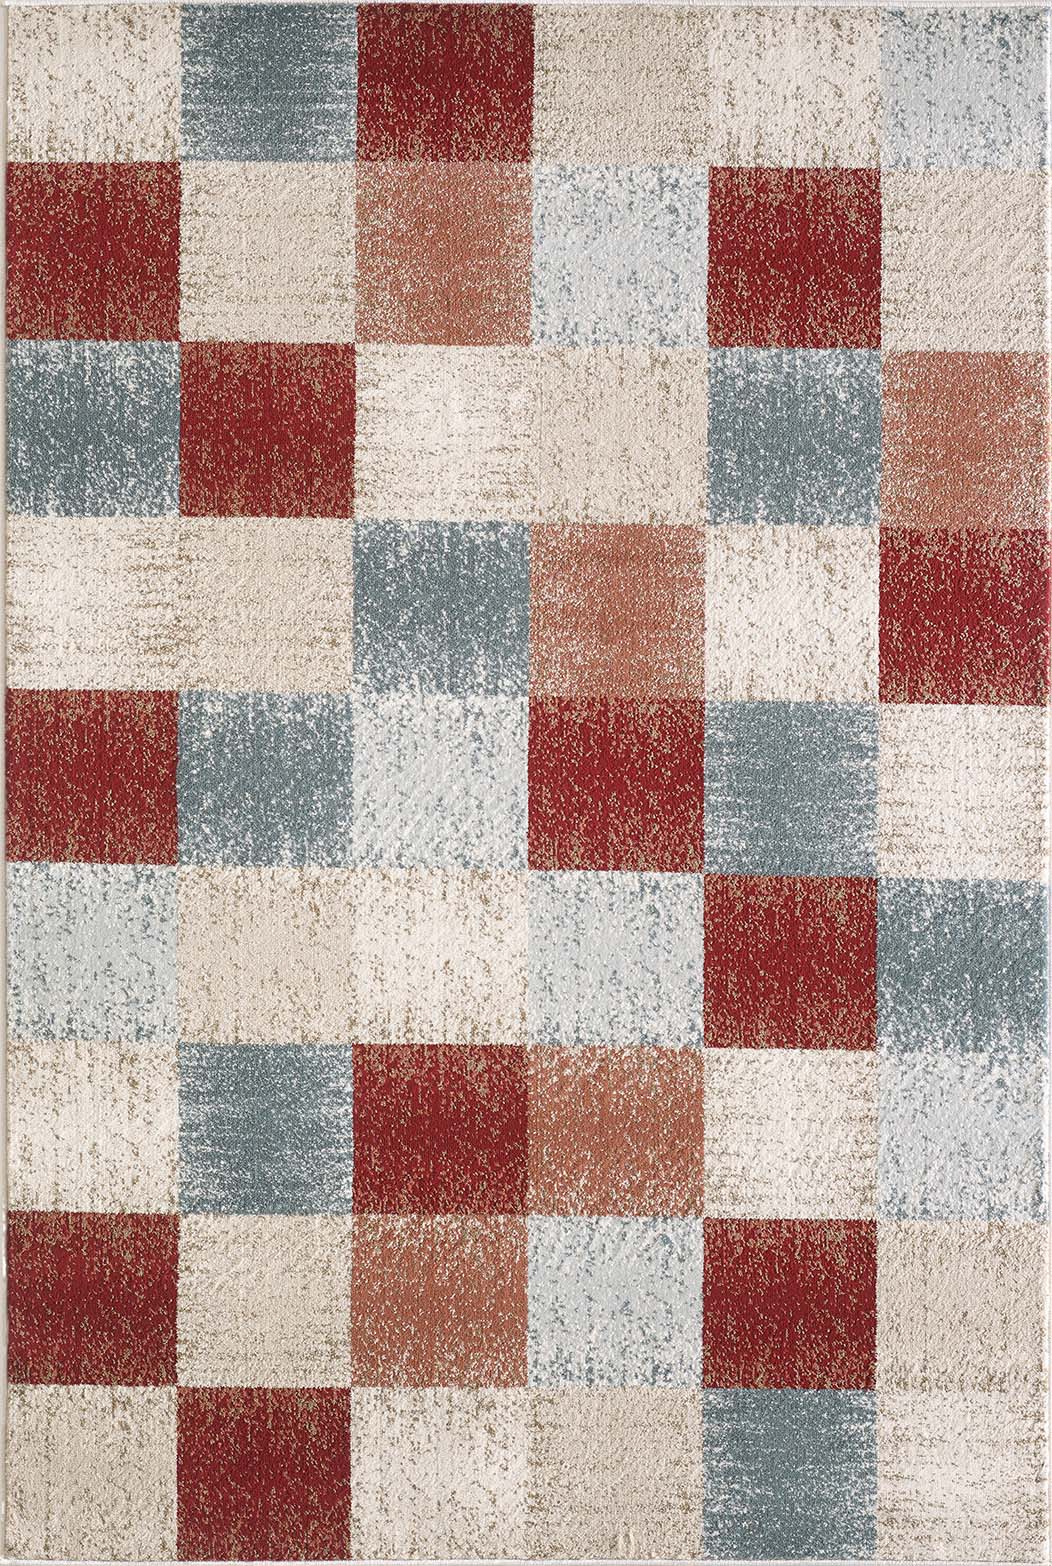 Avalon 5616 Brown Checkered Area Rug Product Image